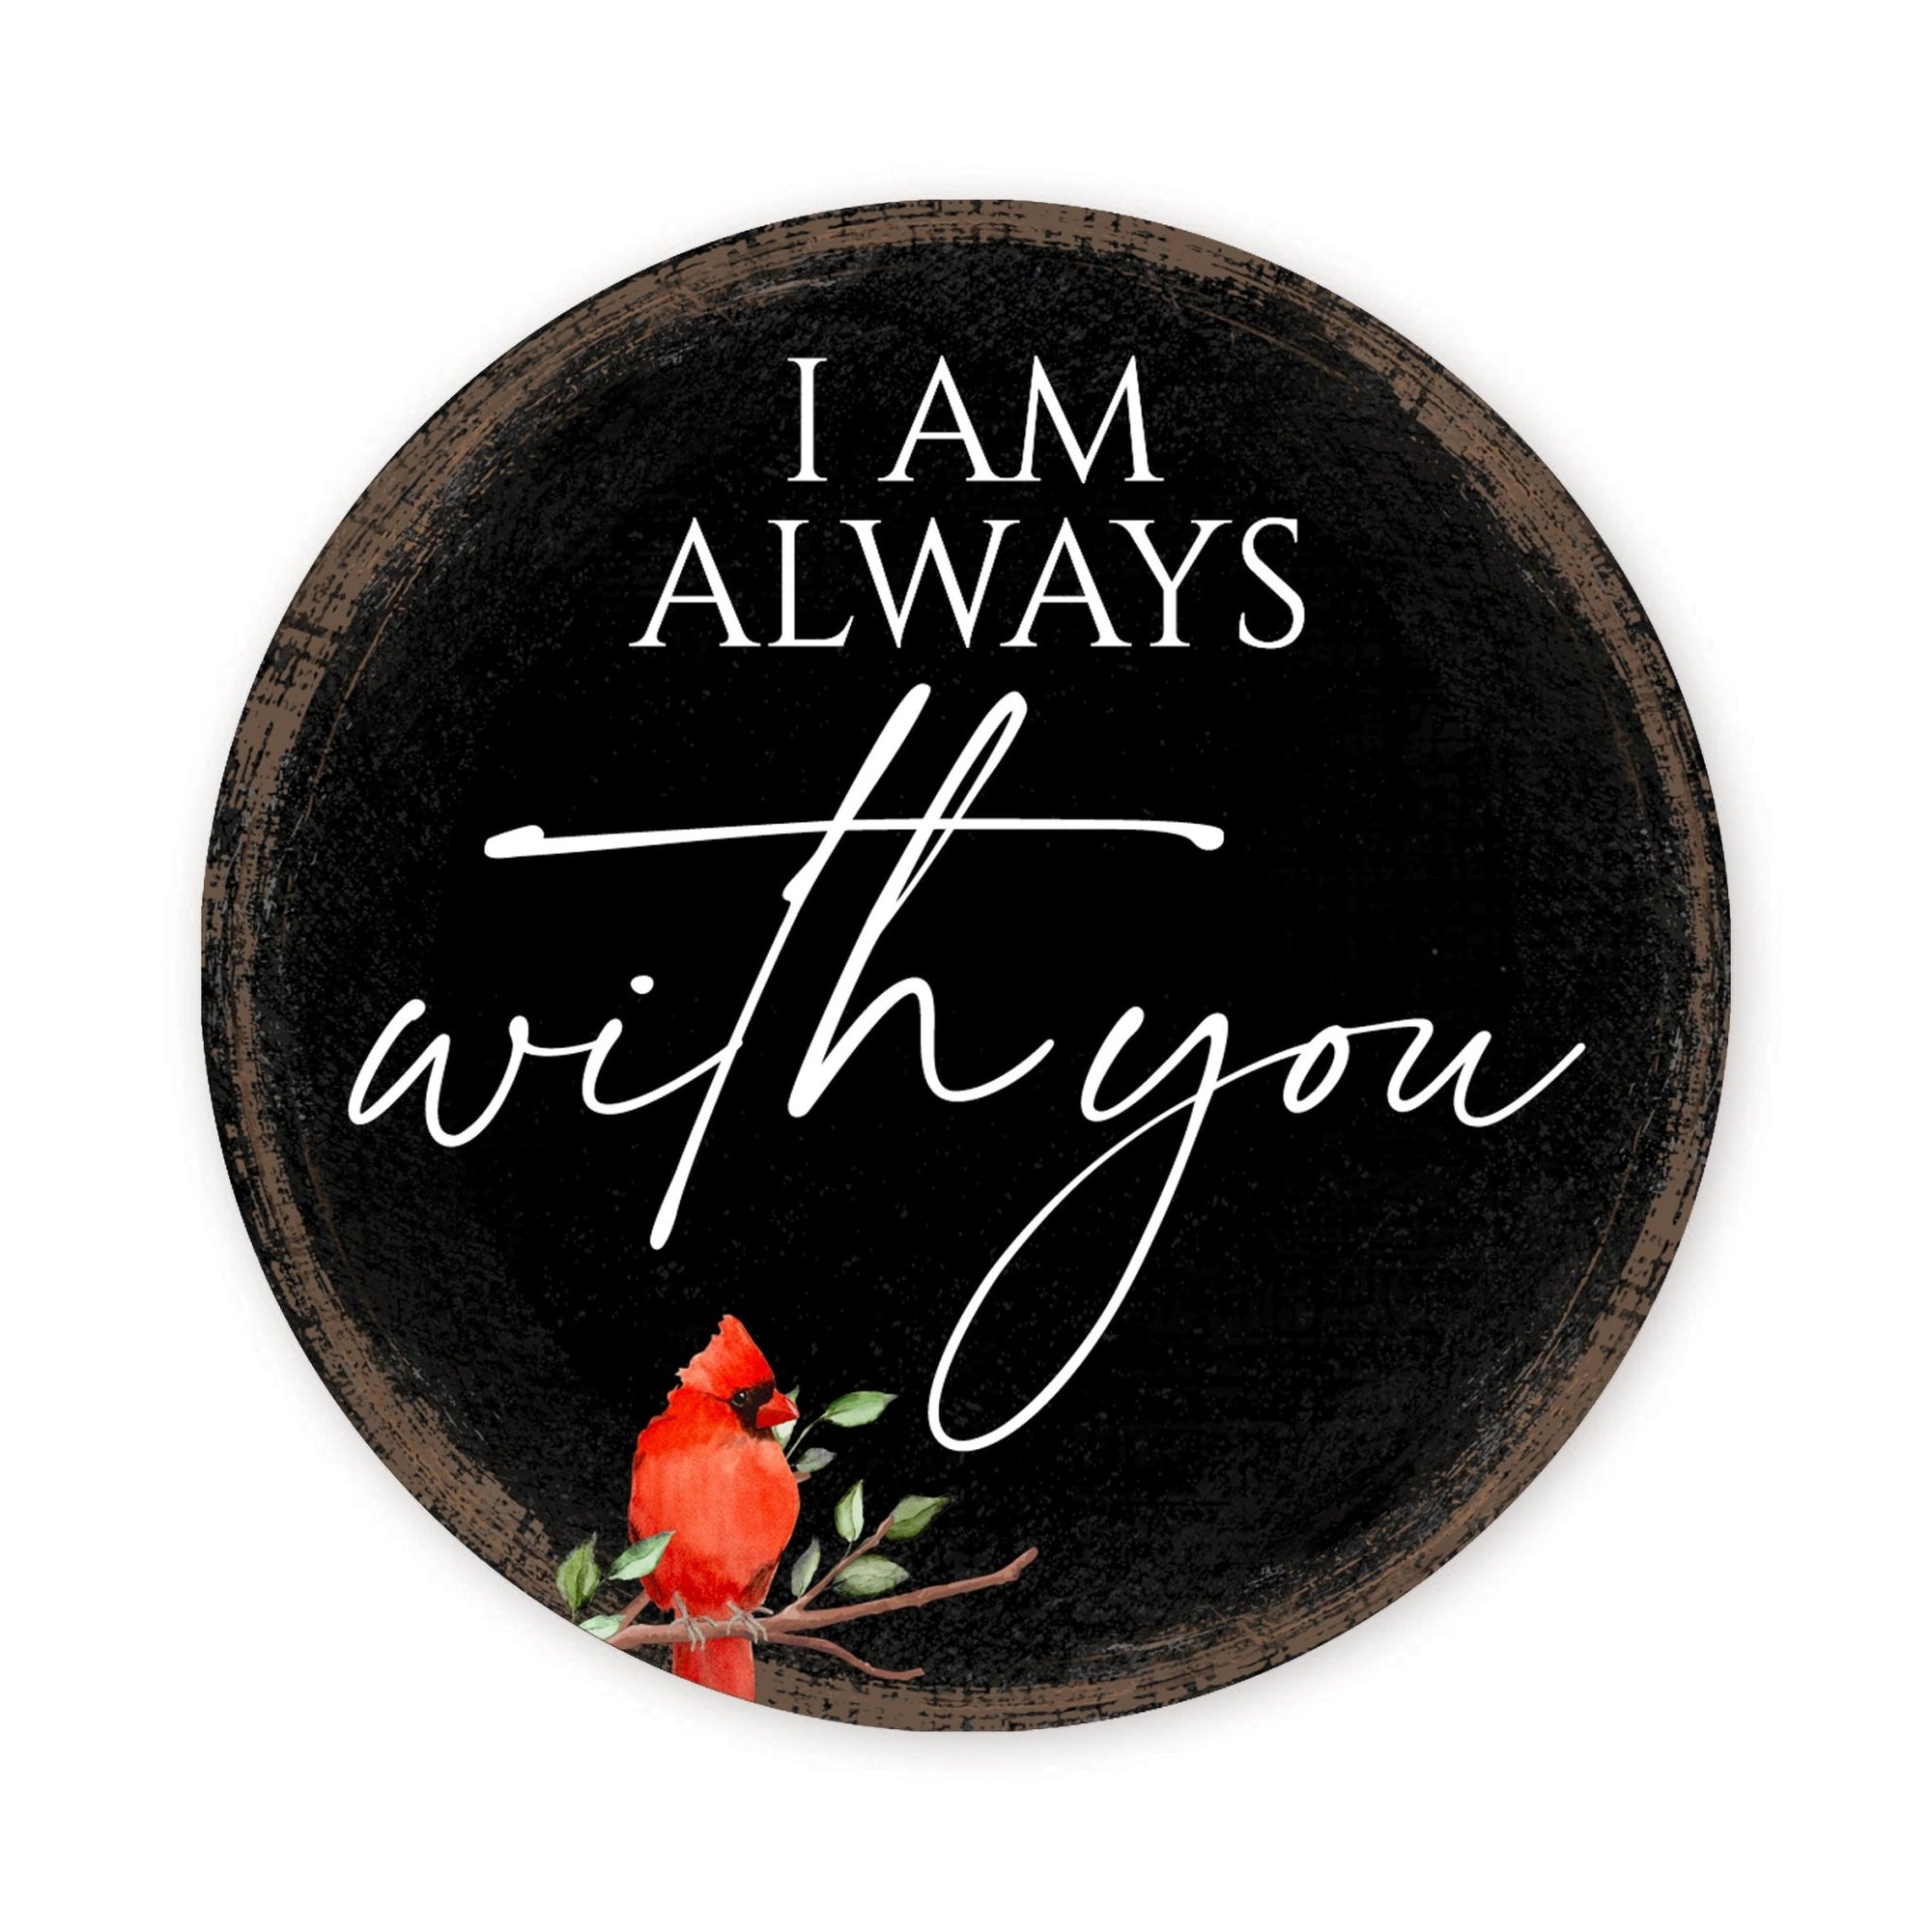 Vintage-Inspired Cardinal Wooden Magnet Printed With Everyday Inspirational Verses Gift Ideas - I Am Always - LifeSong Milestones